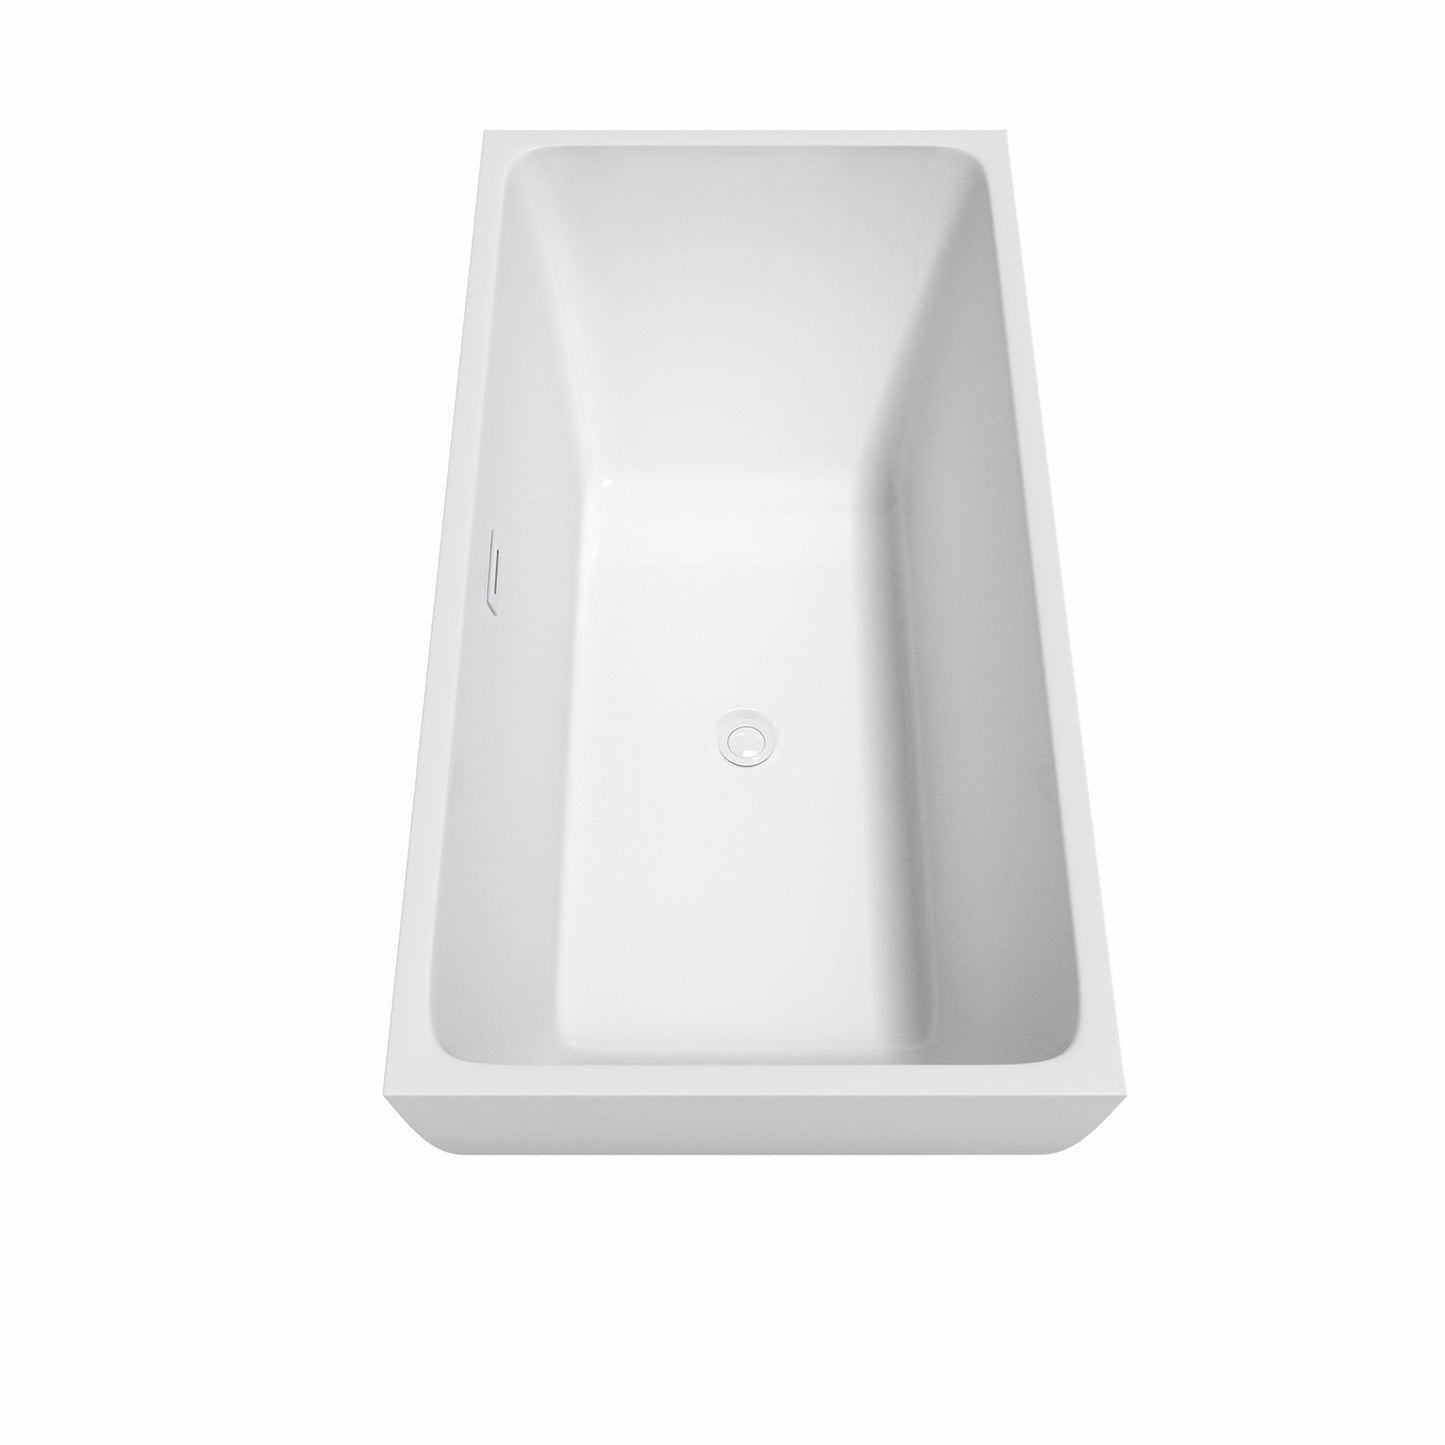 Wyndham Collection Rachel 59" Freestanding Bathtub in White With Shiny White Trim and Floor Mounted Faucet in Matte Black